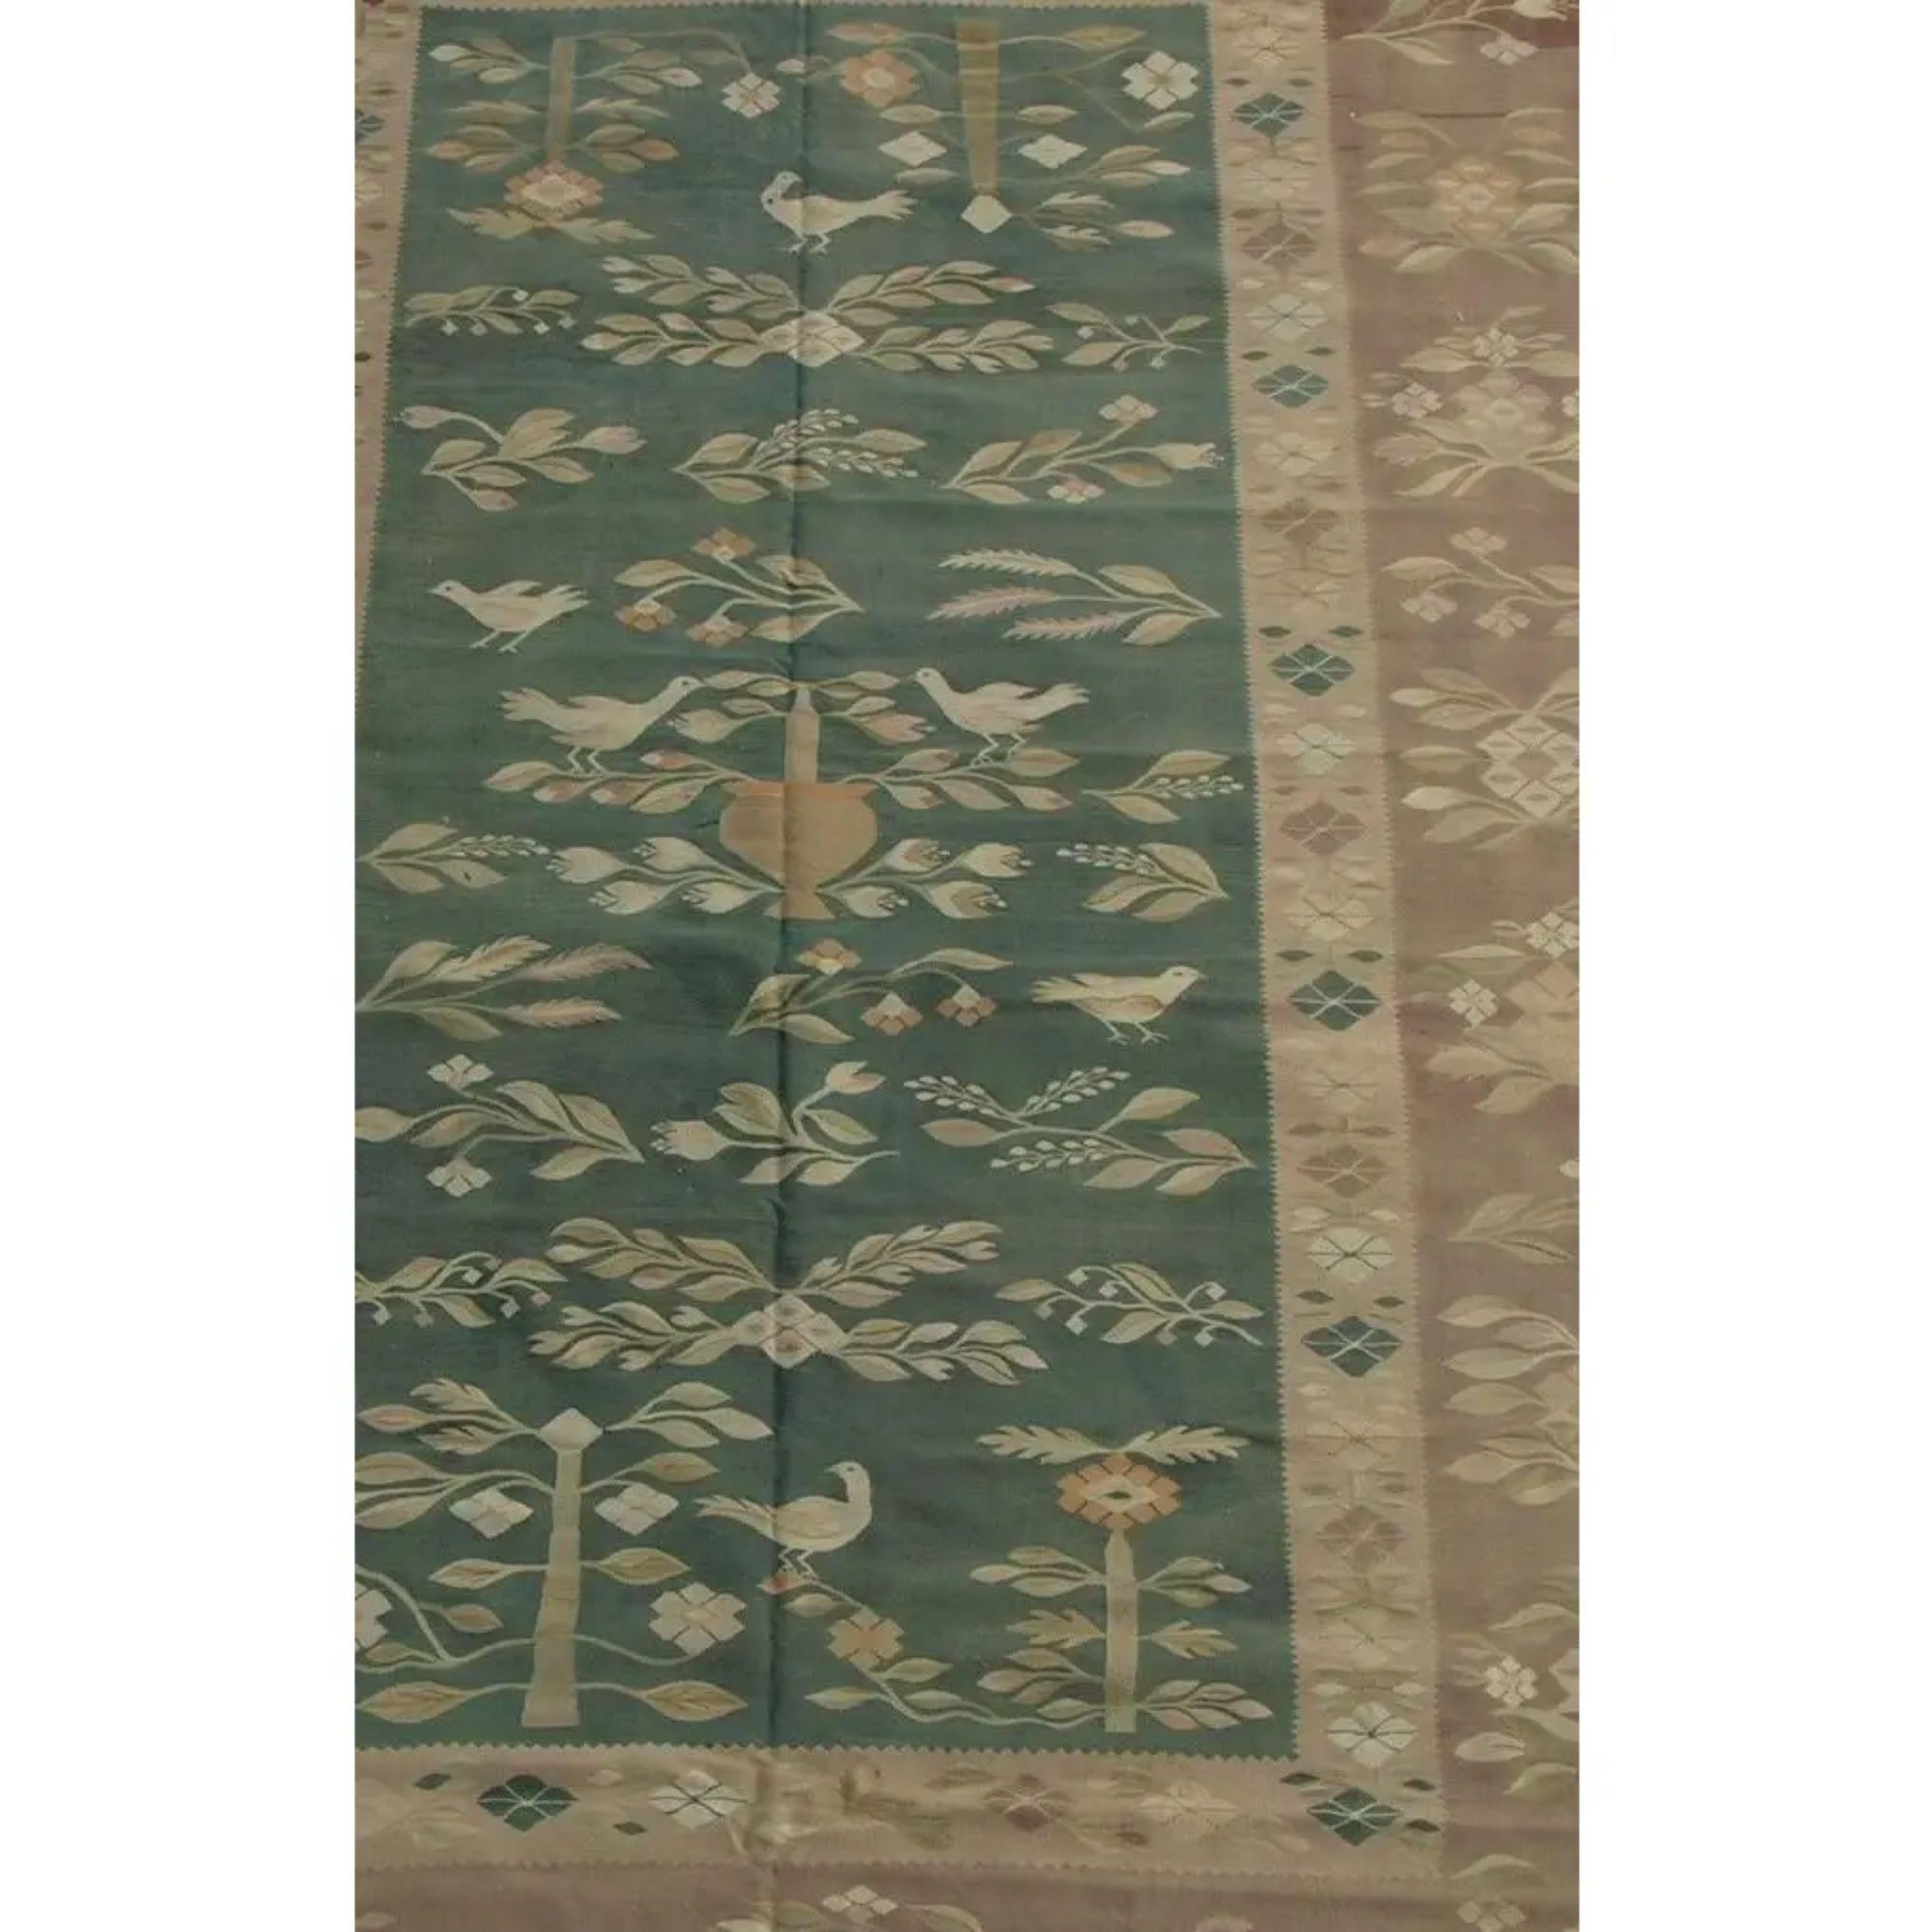 Antique Bessarabian Bird and Floral Design Rug 10'3'' X 6'3'' In Good Condition For Sale In Los Angeles, US